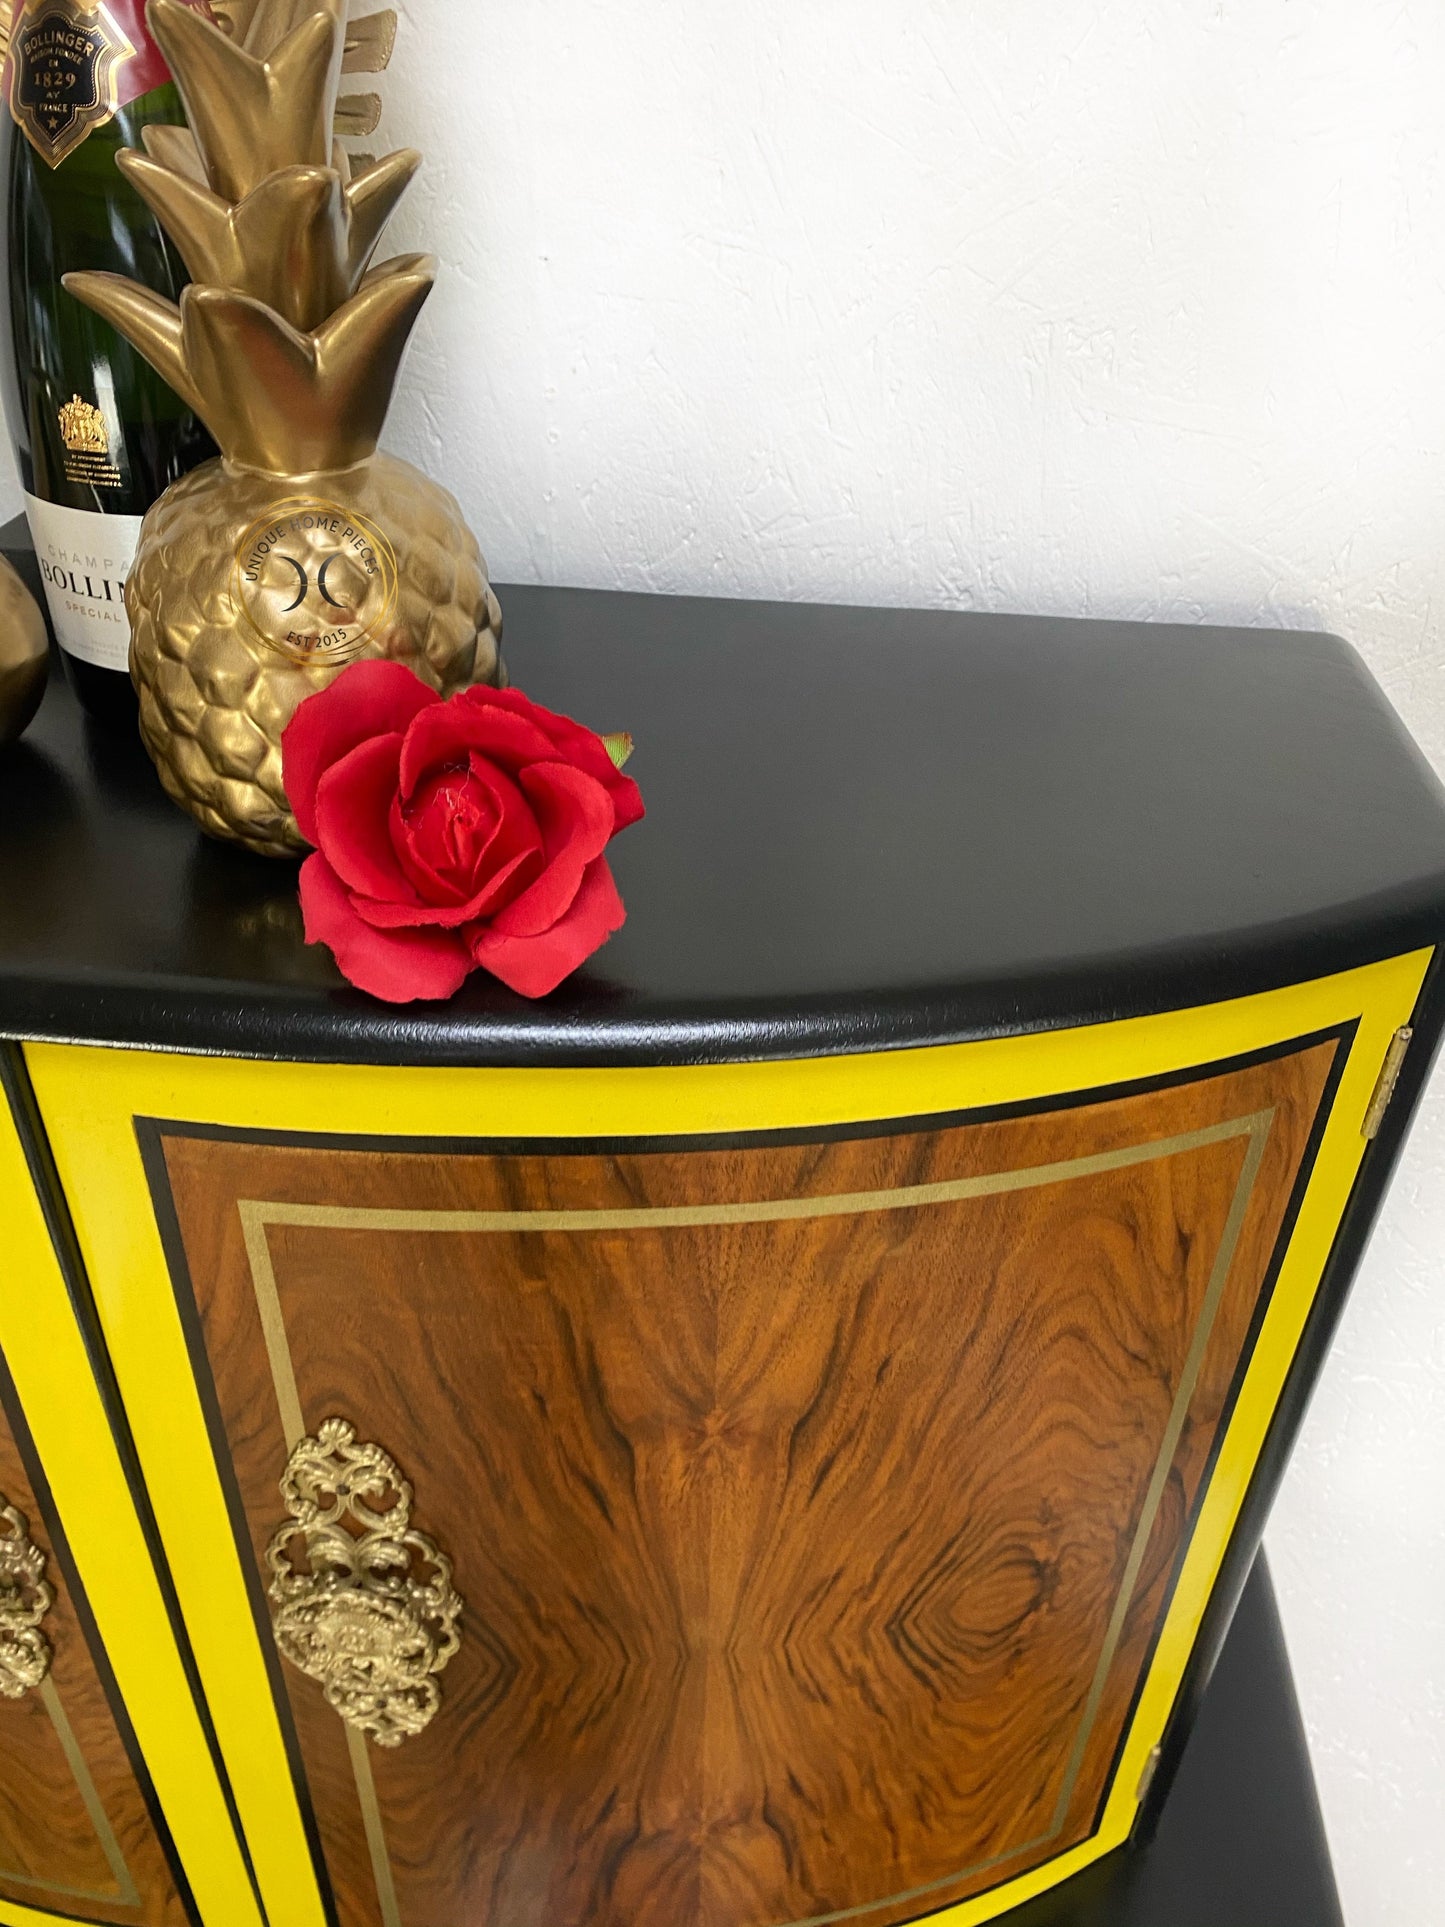 Bow Fronted  Drinks Black/Yellow Walnut Cocktail Cabinet Bar - Unique Home Pieces